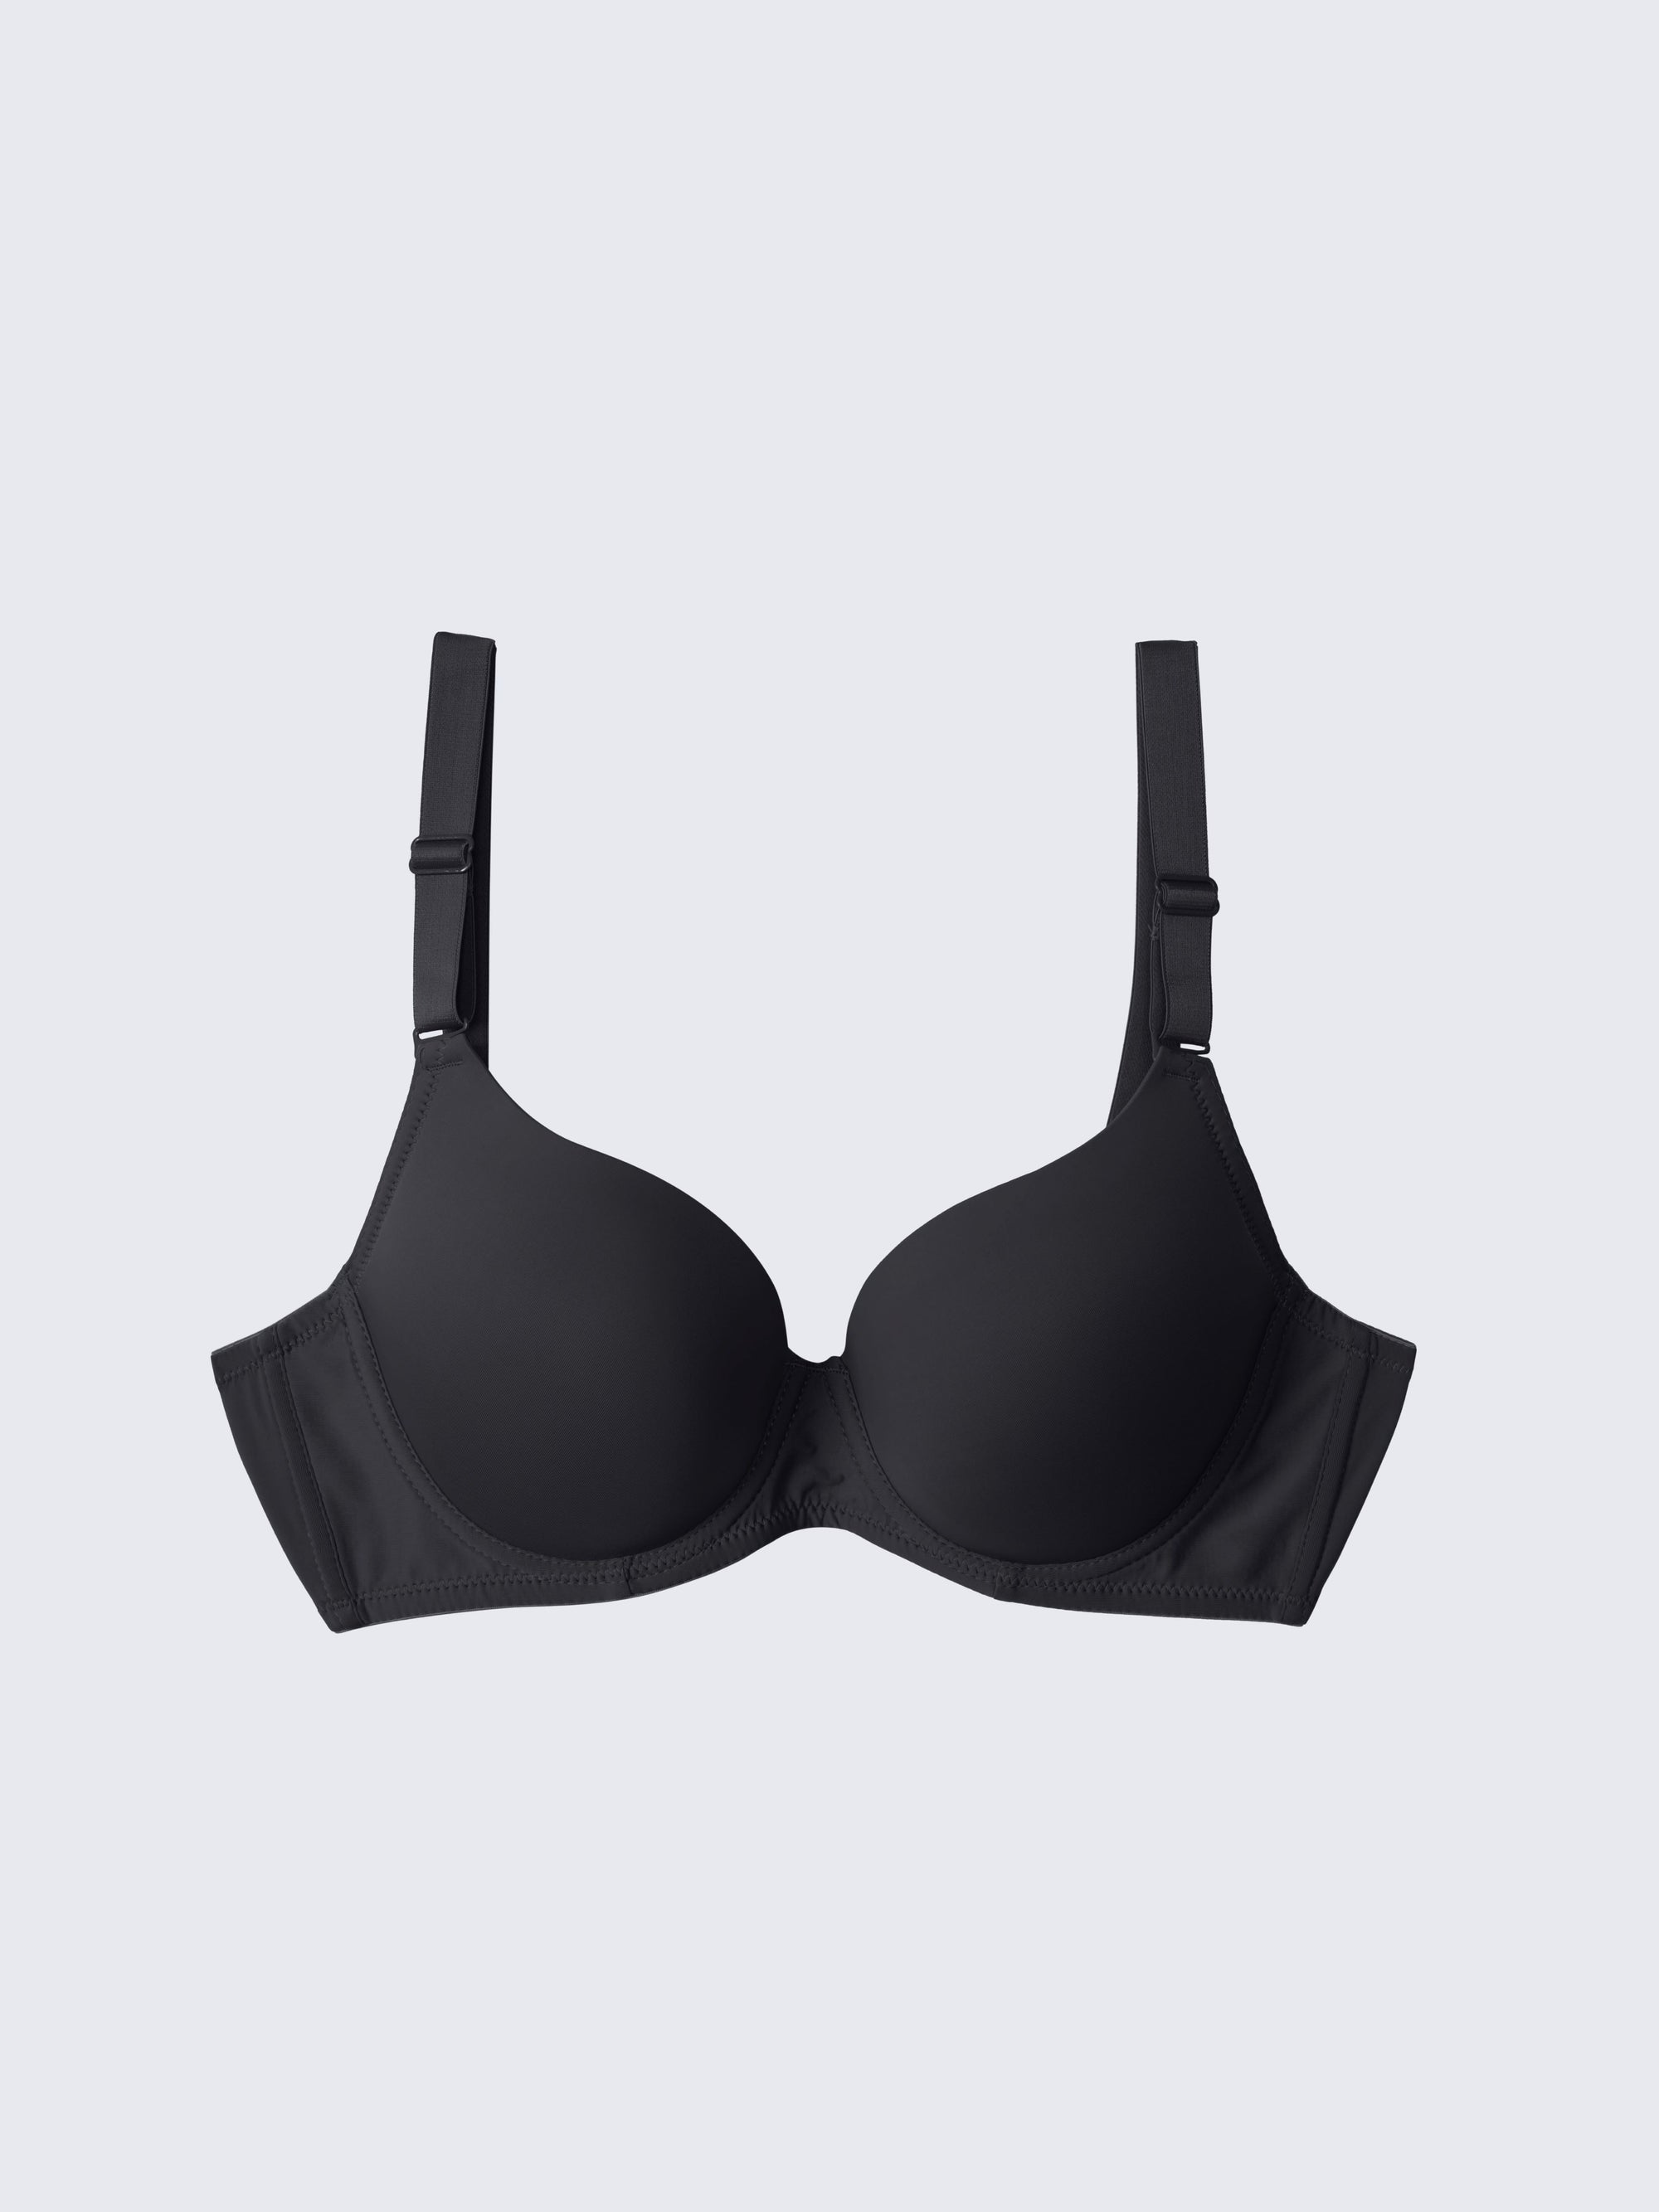 Women's Bra with Underwire, Sexy Front Closure, C85 Padded Push Up